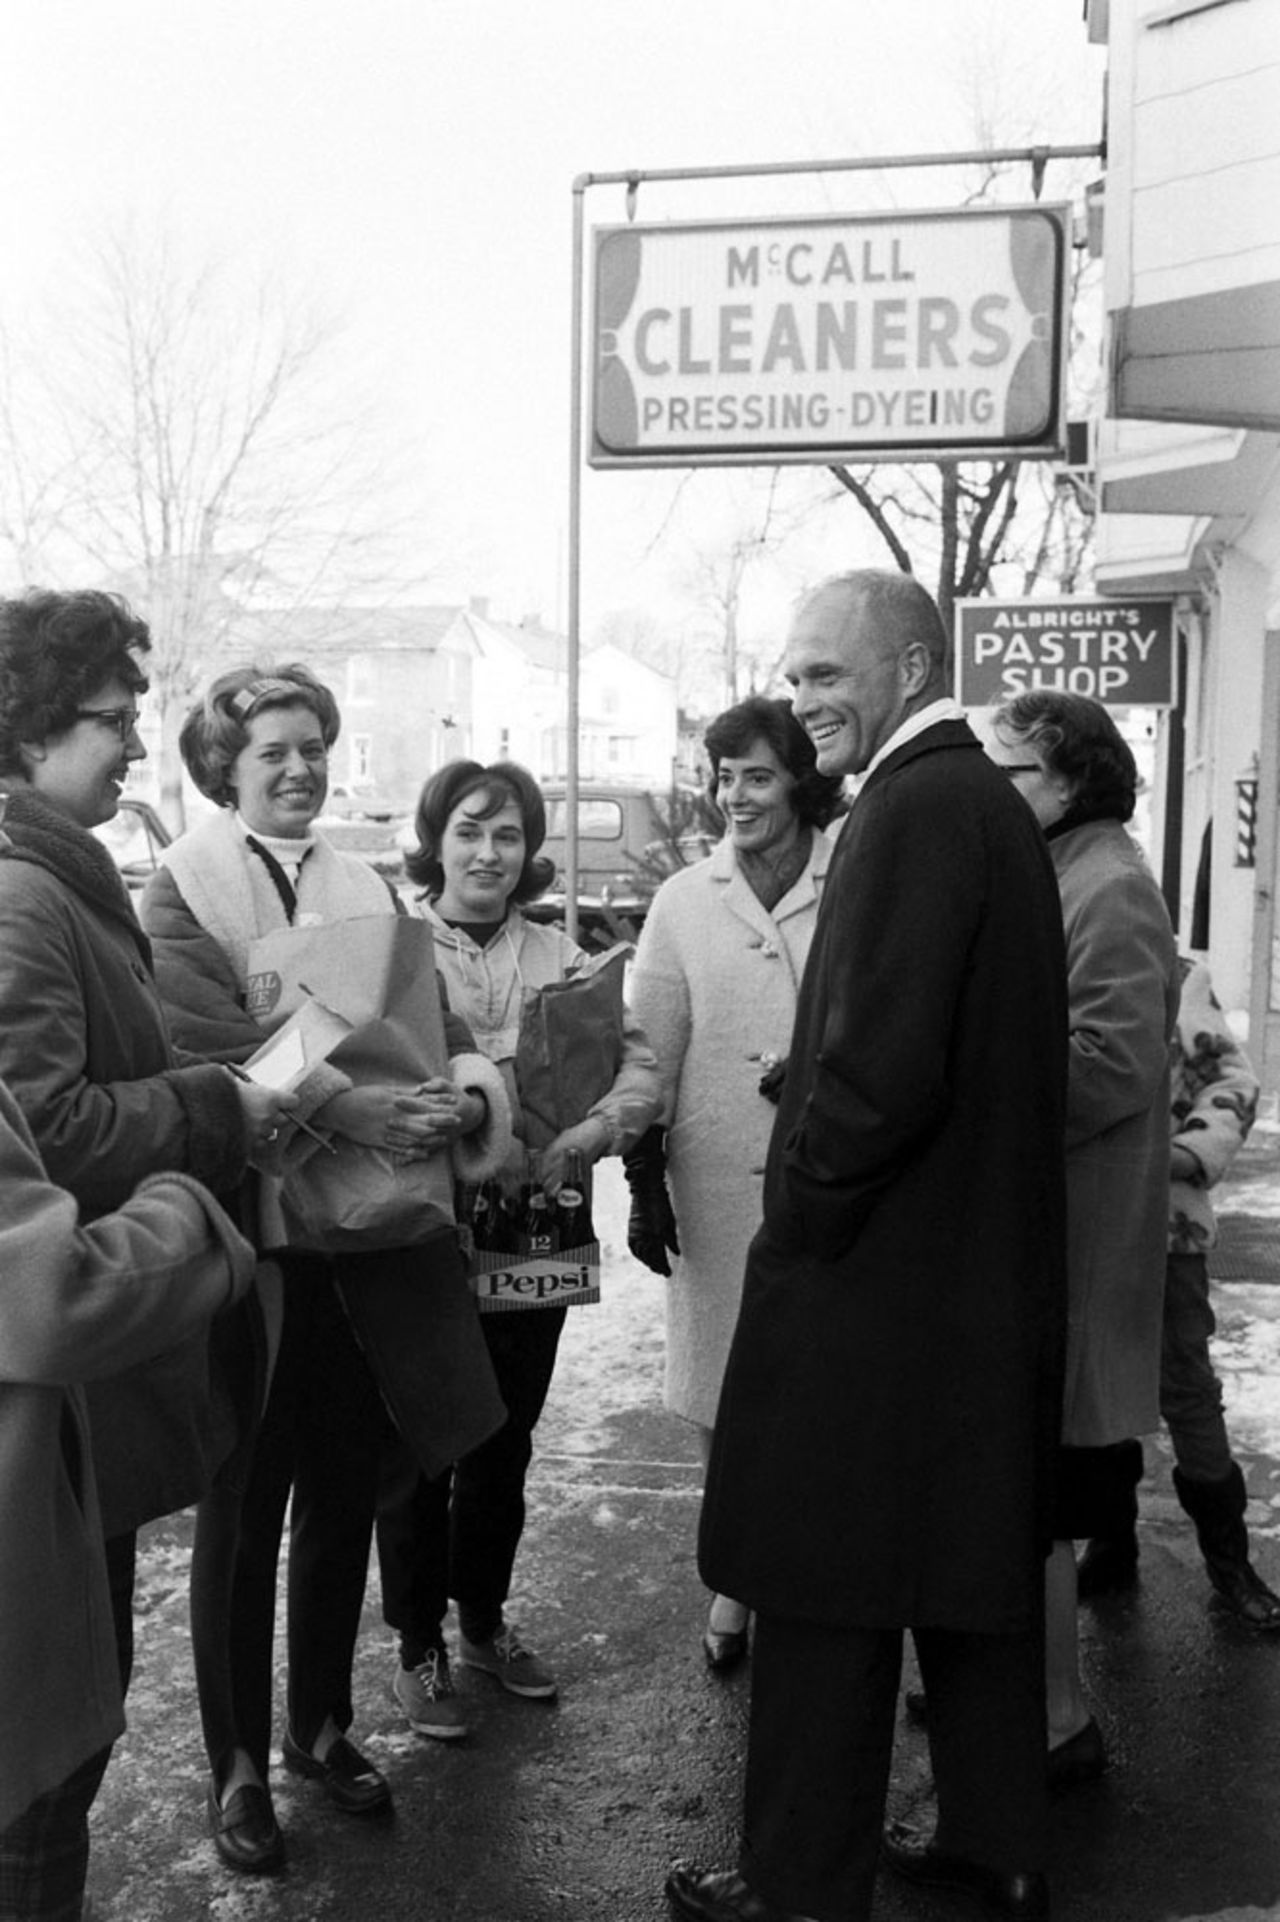 Glenn with family members during his Senate campaign in 1964. He didn't win, but he ran again and was elected in 1974. He eventually served four terms.